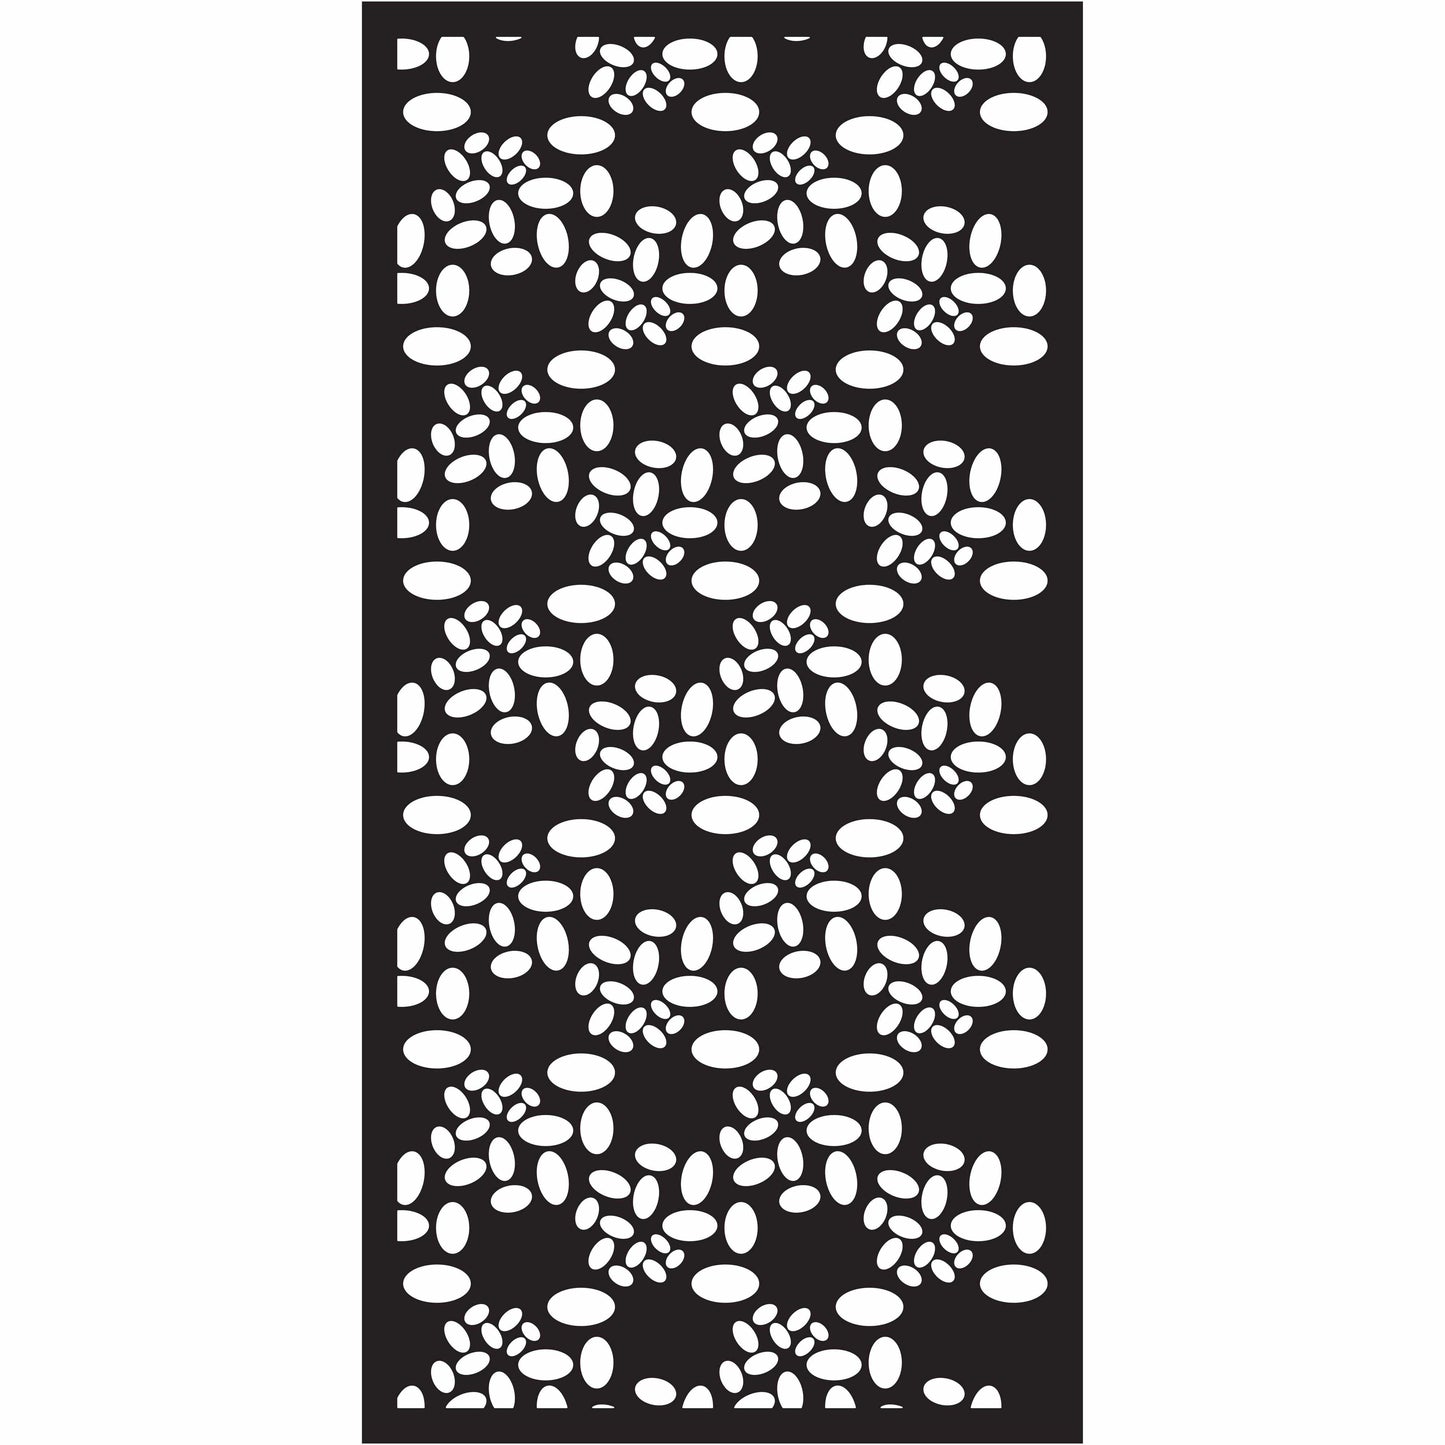 Abstract and Floral Decorative Privacy Screen Panels Doors or Fence-Free DXF files Cut Ready CNC Designs